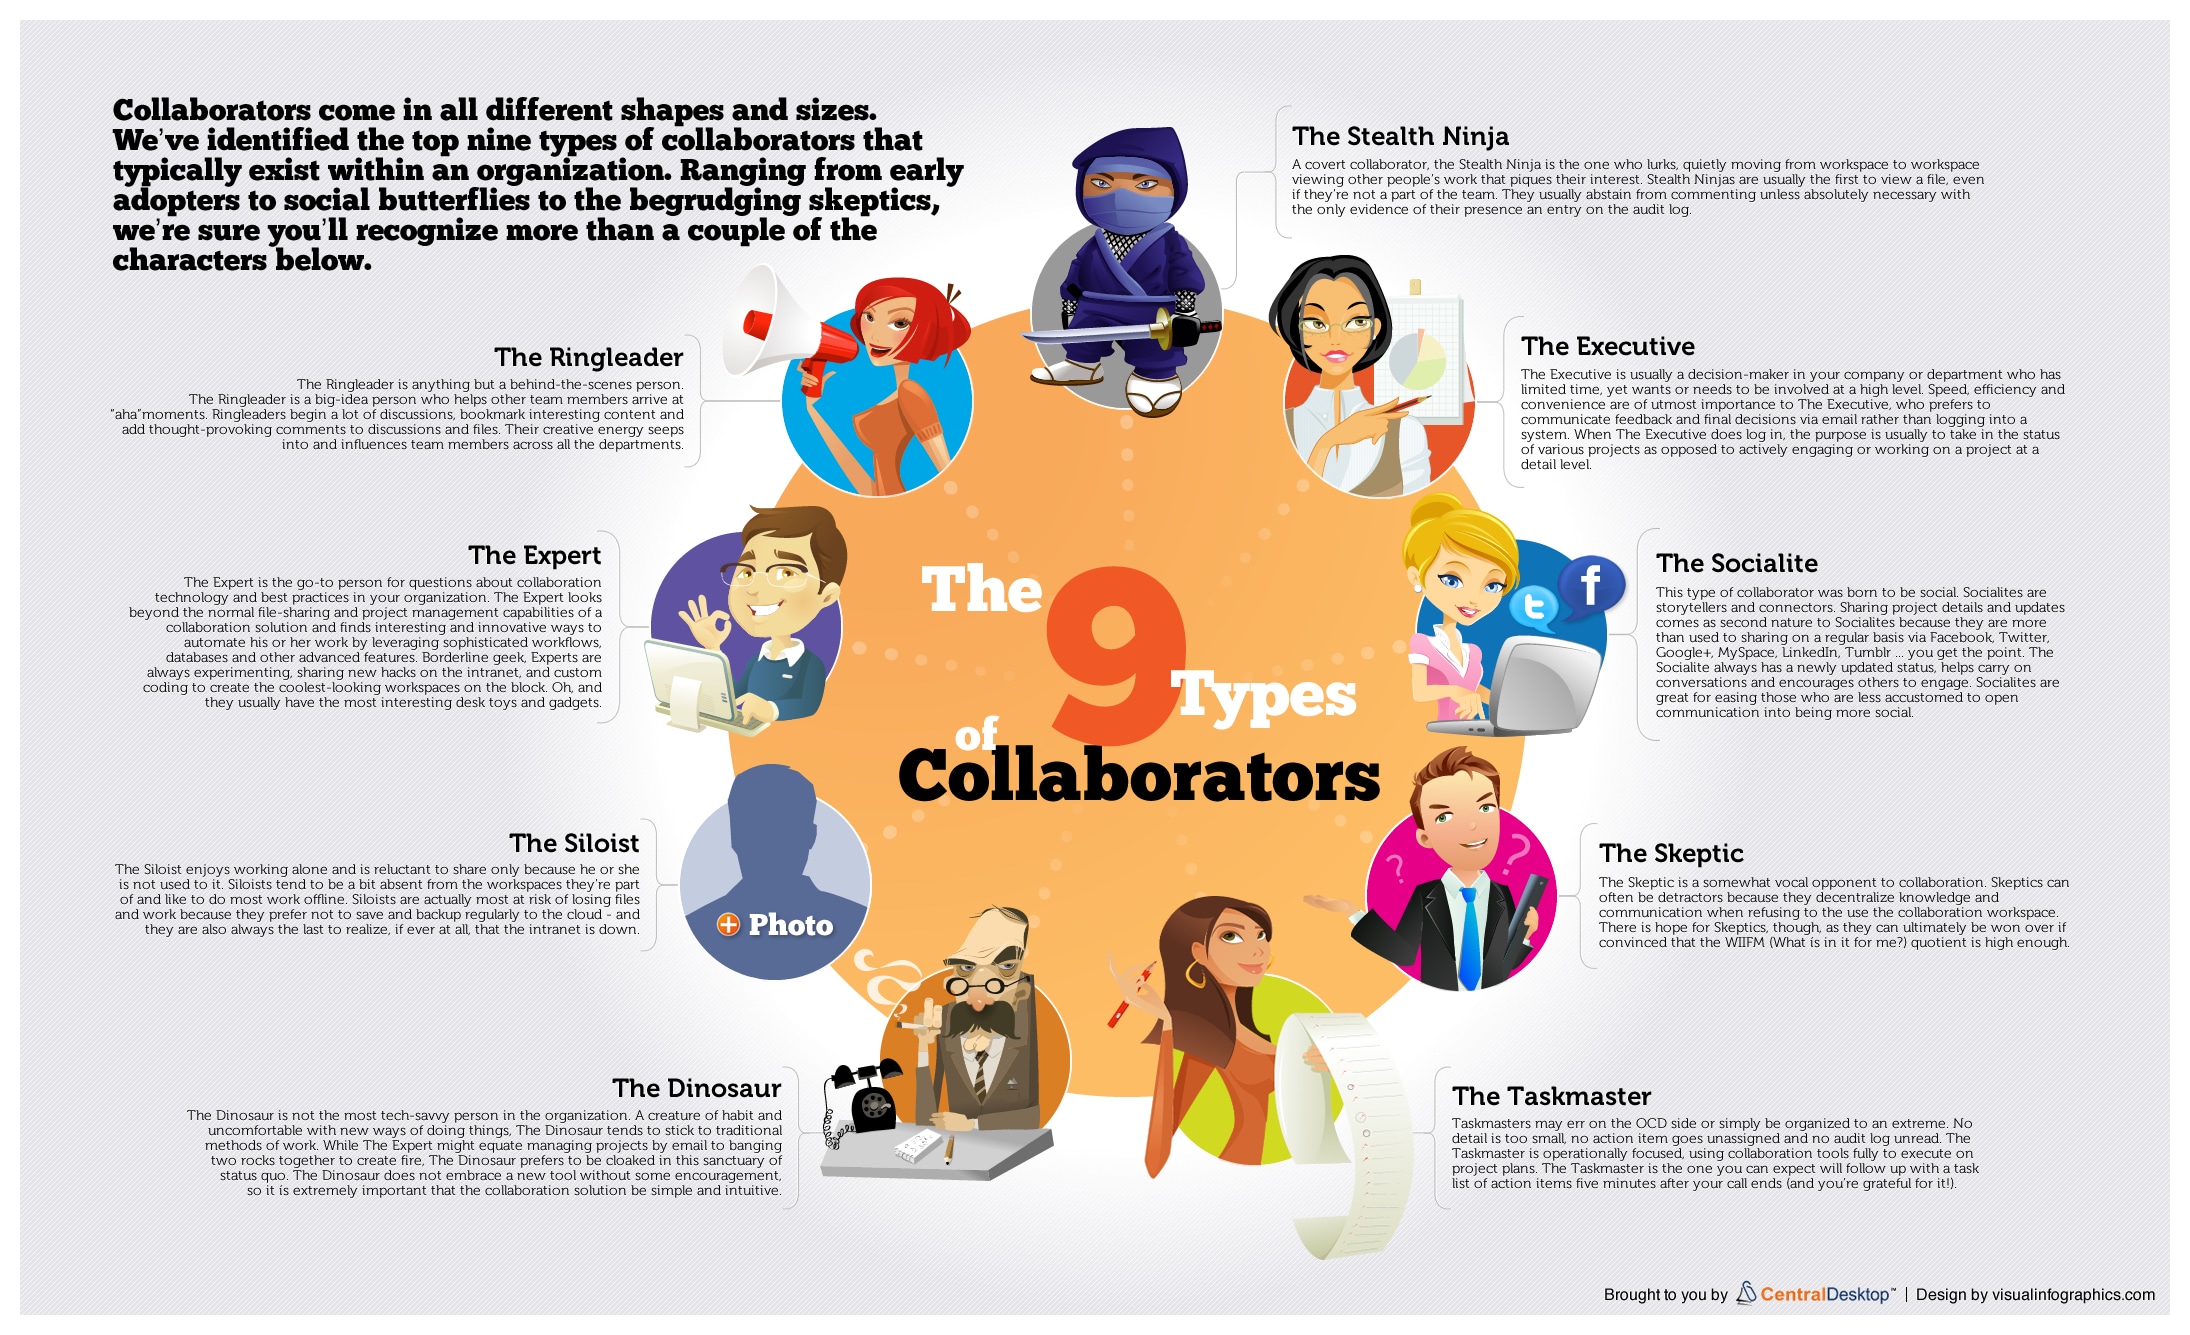 Top 9 Collaboration Types You Will Find In Every Company [Infographic]